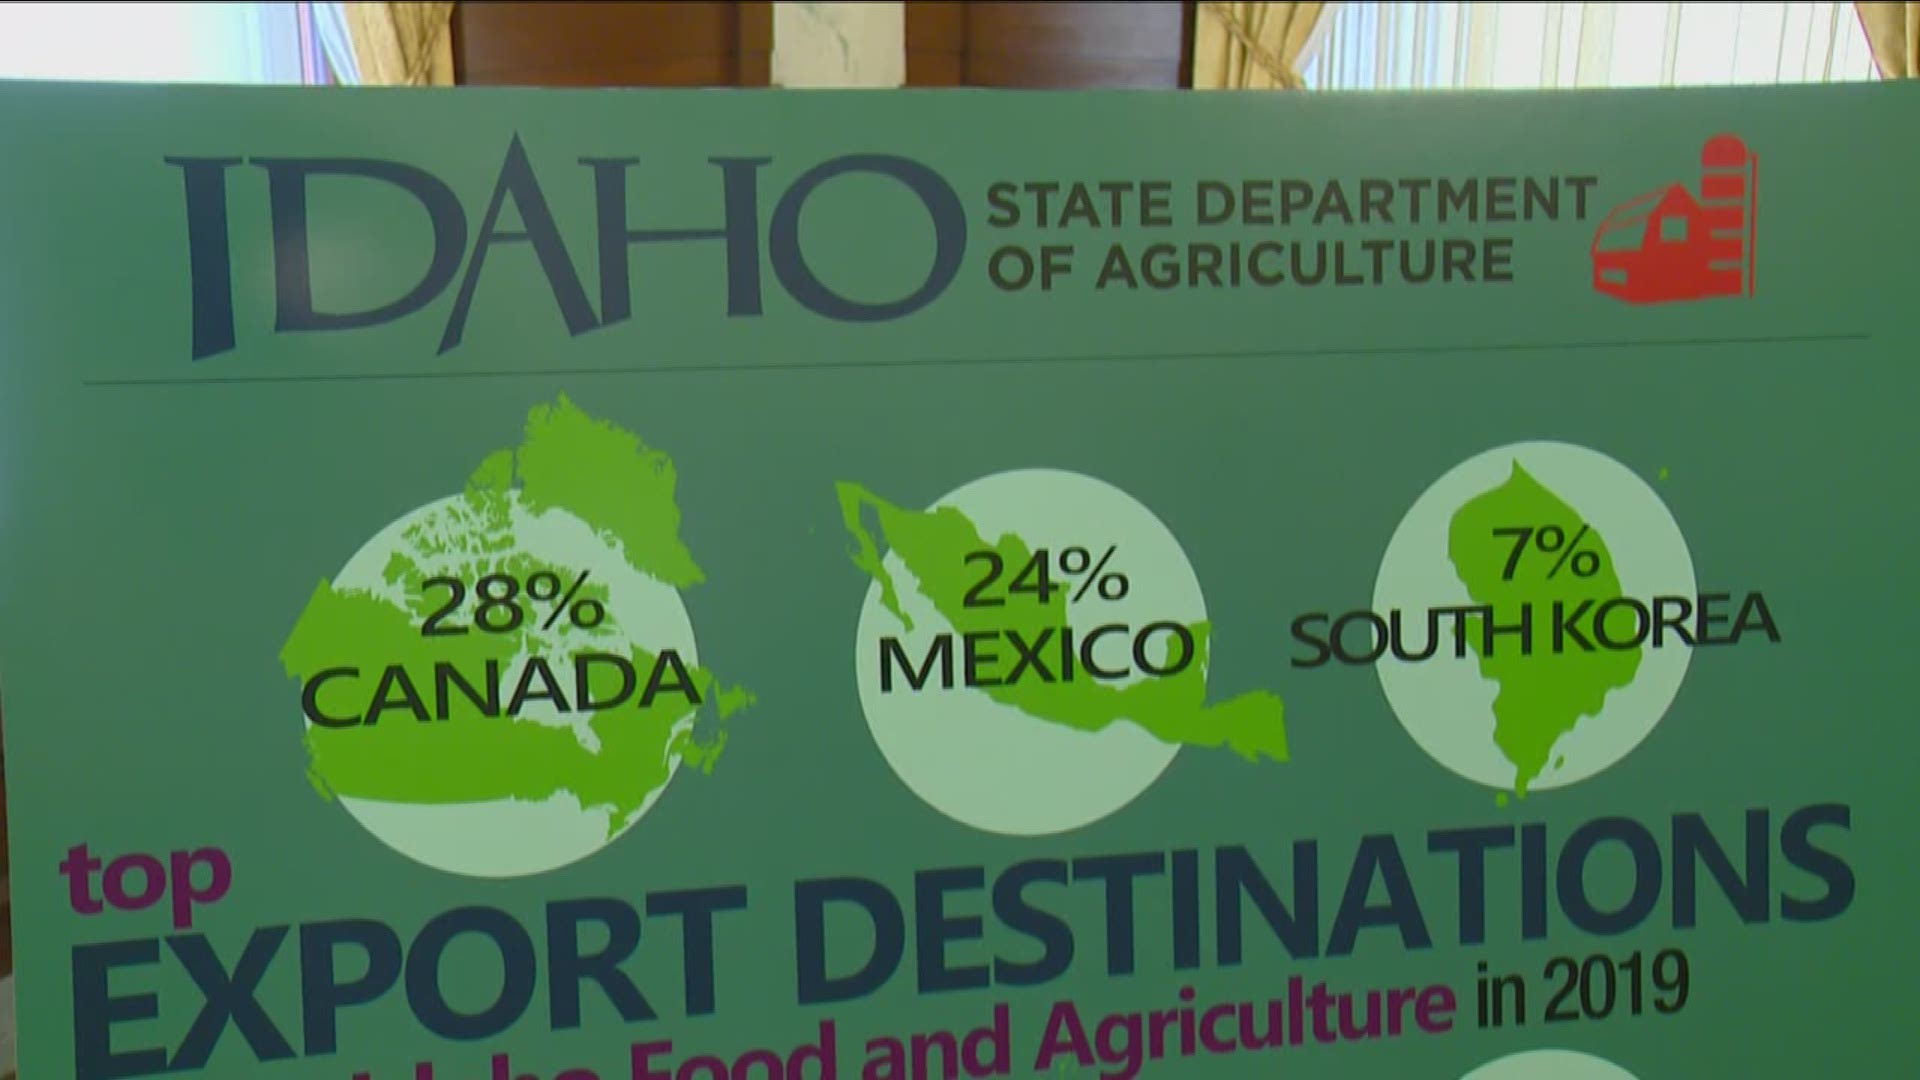 "It's an excellent opportunity to level the playing field," said the vice president of the Idaho Farm Bureau Federation.